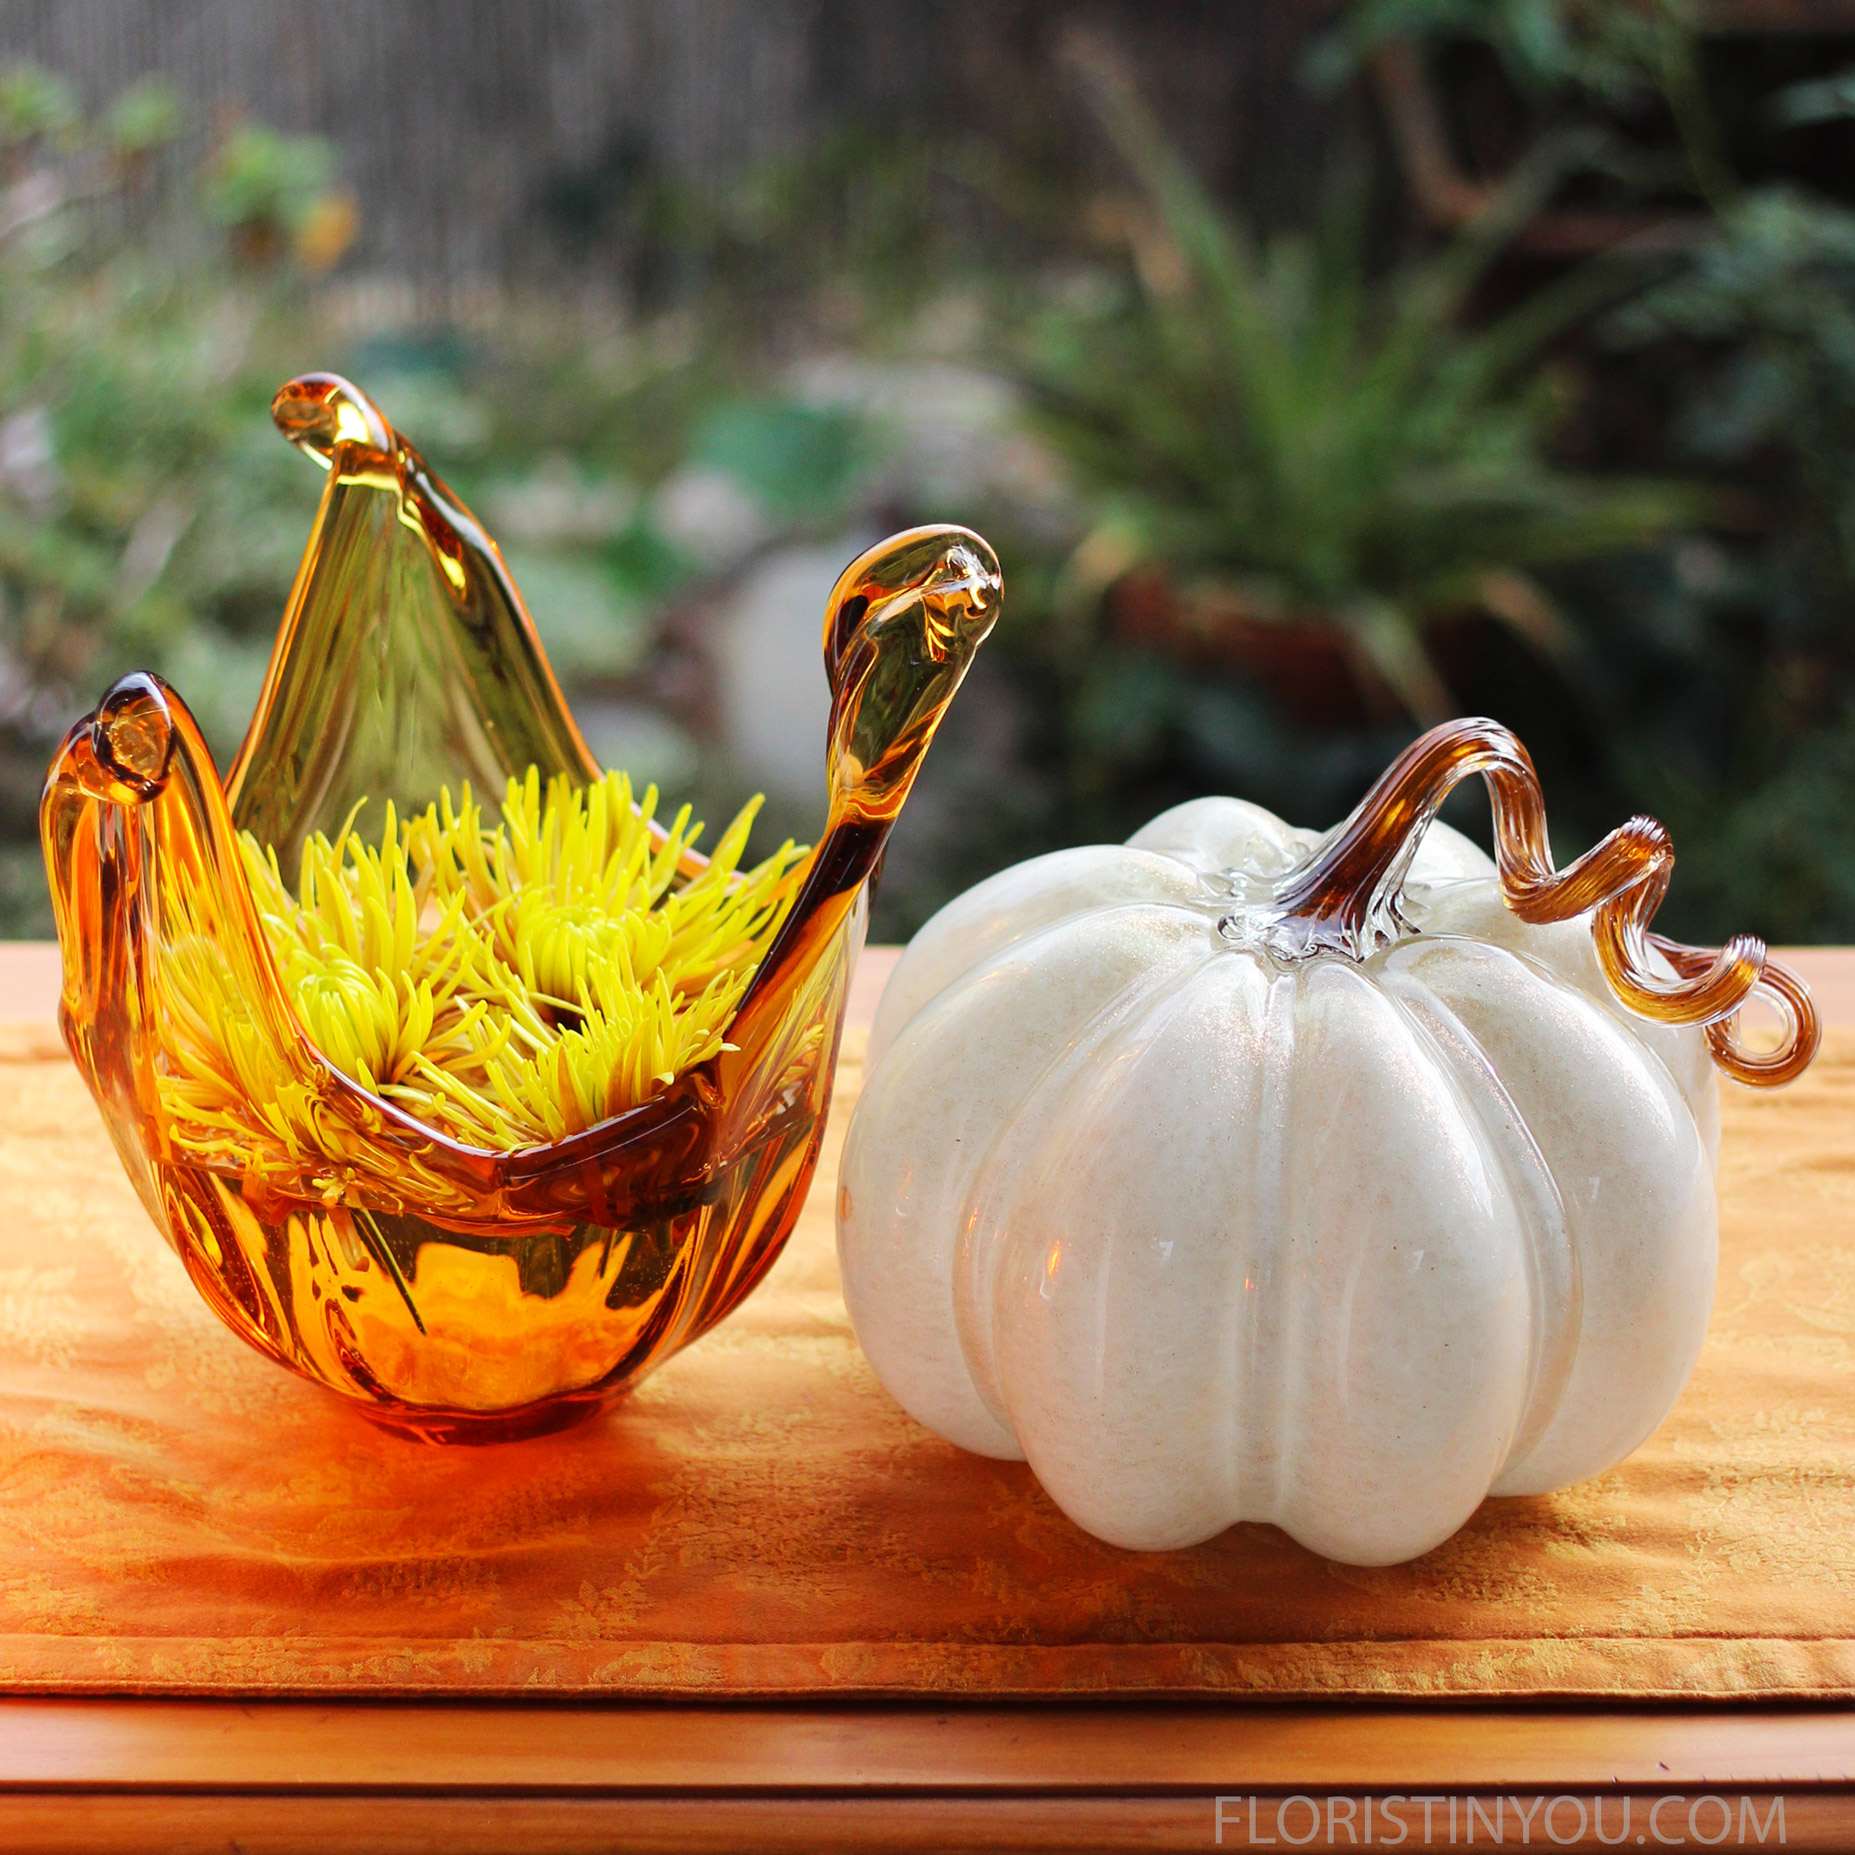 Amber Vase and the White Glass Pumpkin